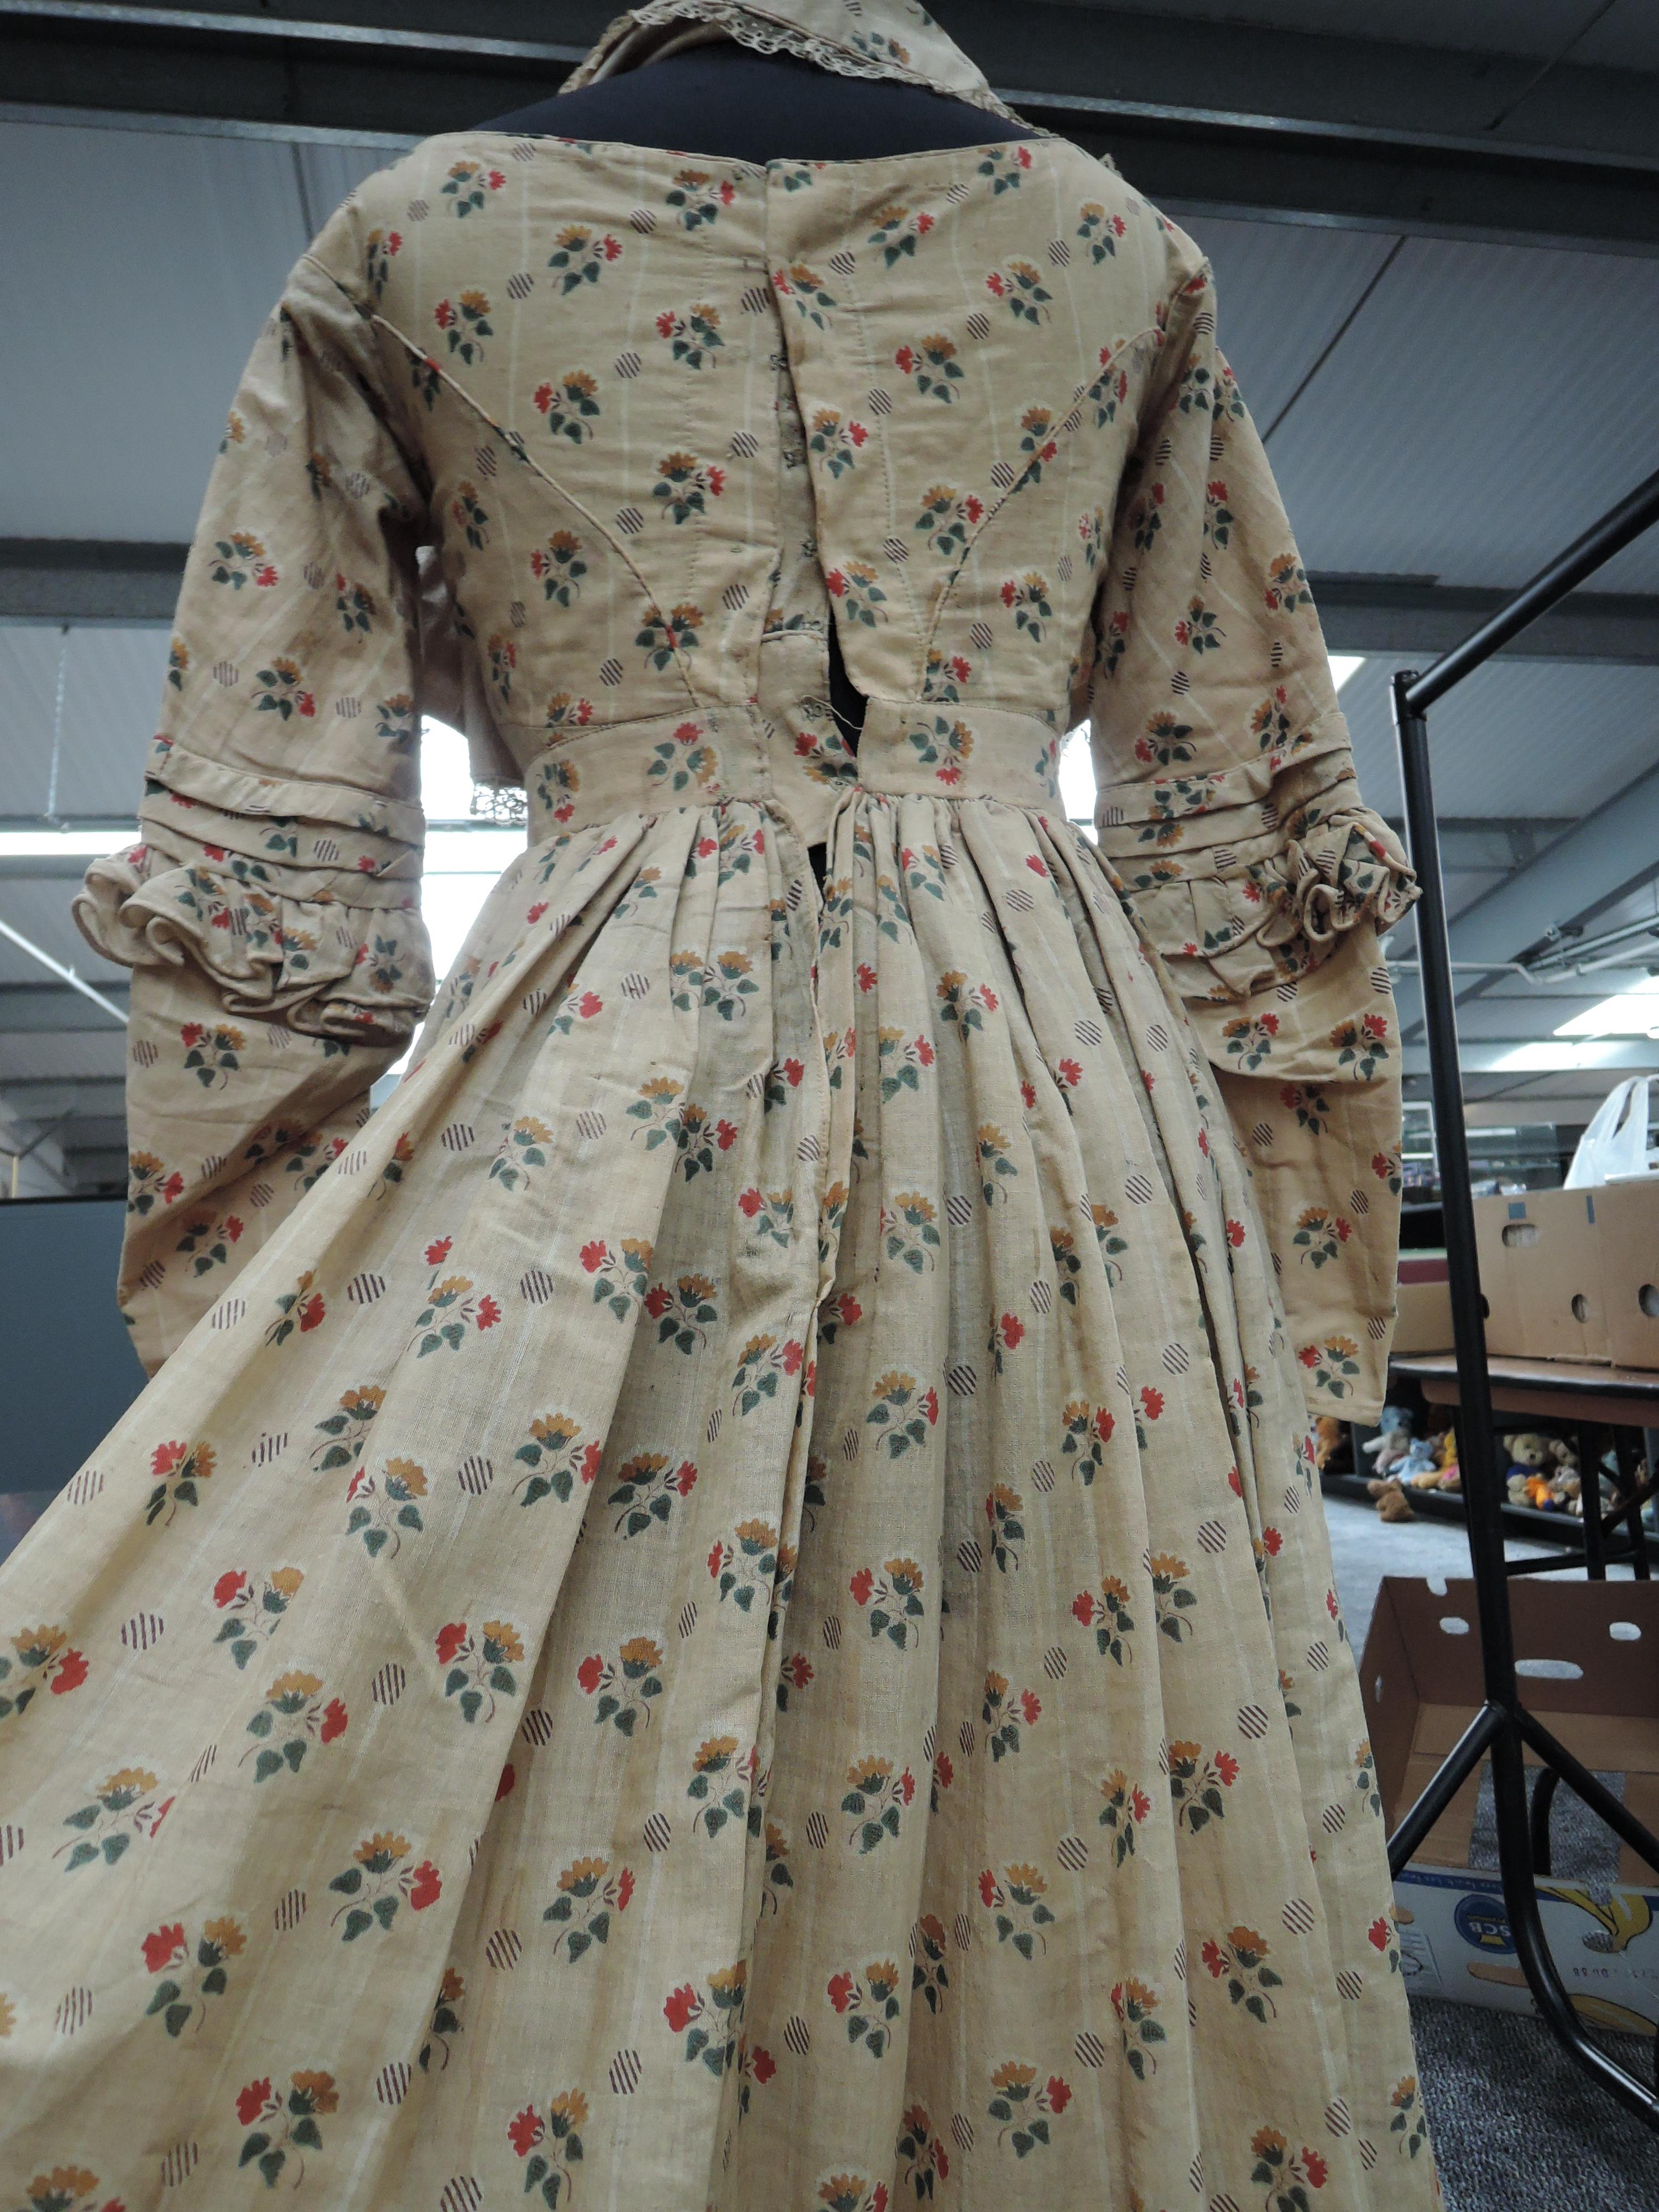 A Victorian cotton dress and lace edged cape having floral print on beige ground, superb details - Image 6 of 10